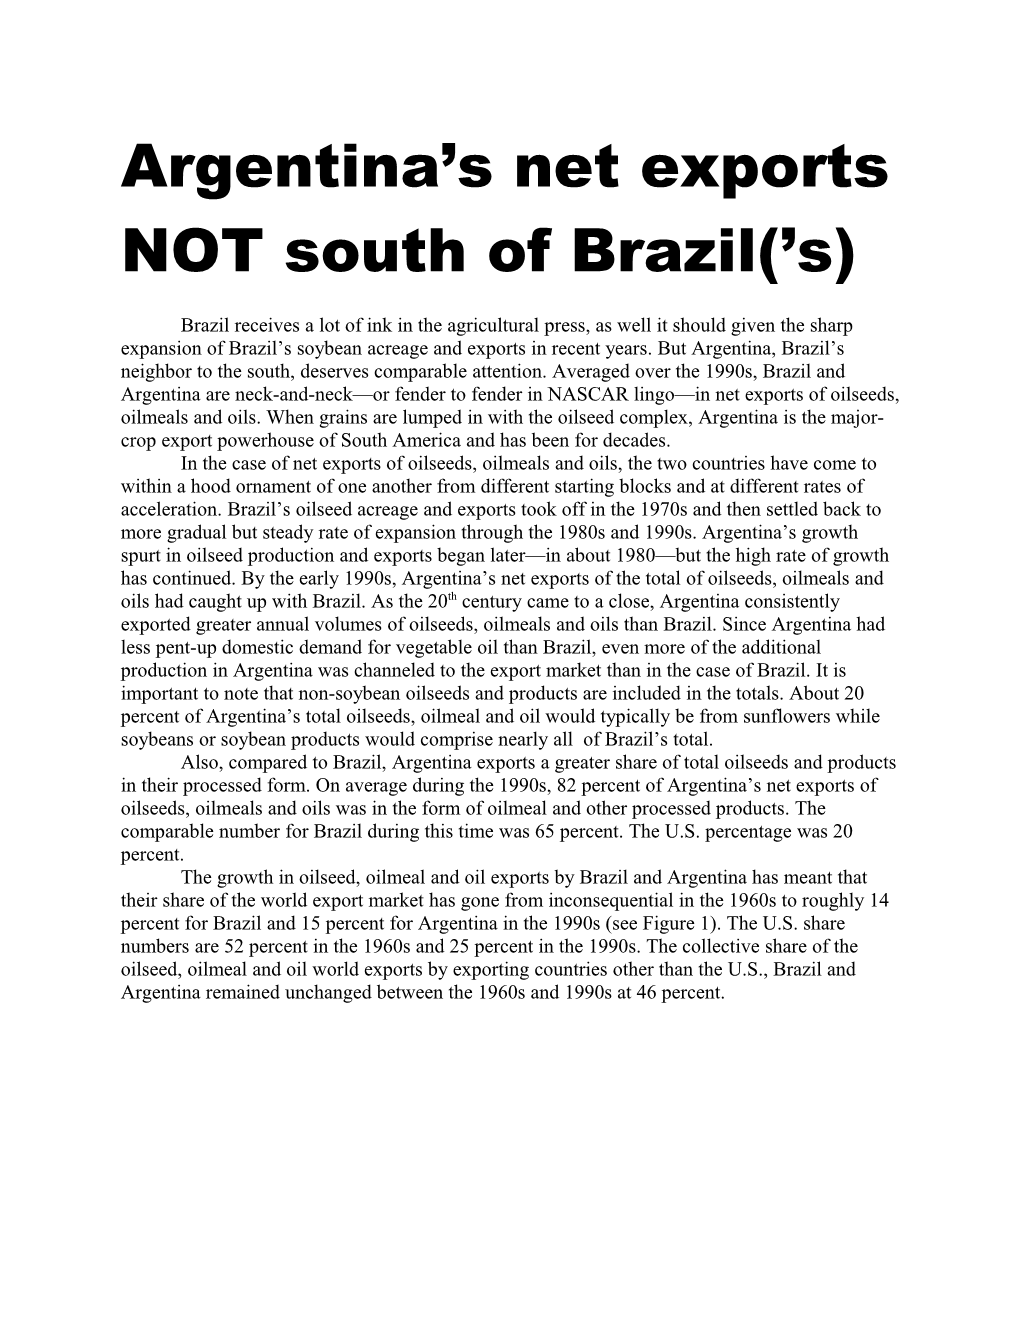 Brazil Receives a Lot of Ink in the Agricultural Press, As Well It Should Given the Sharp